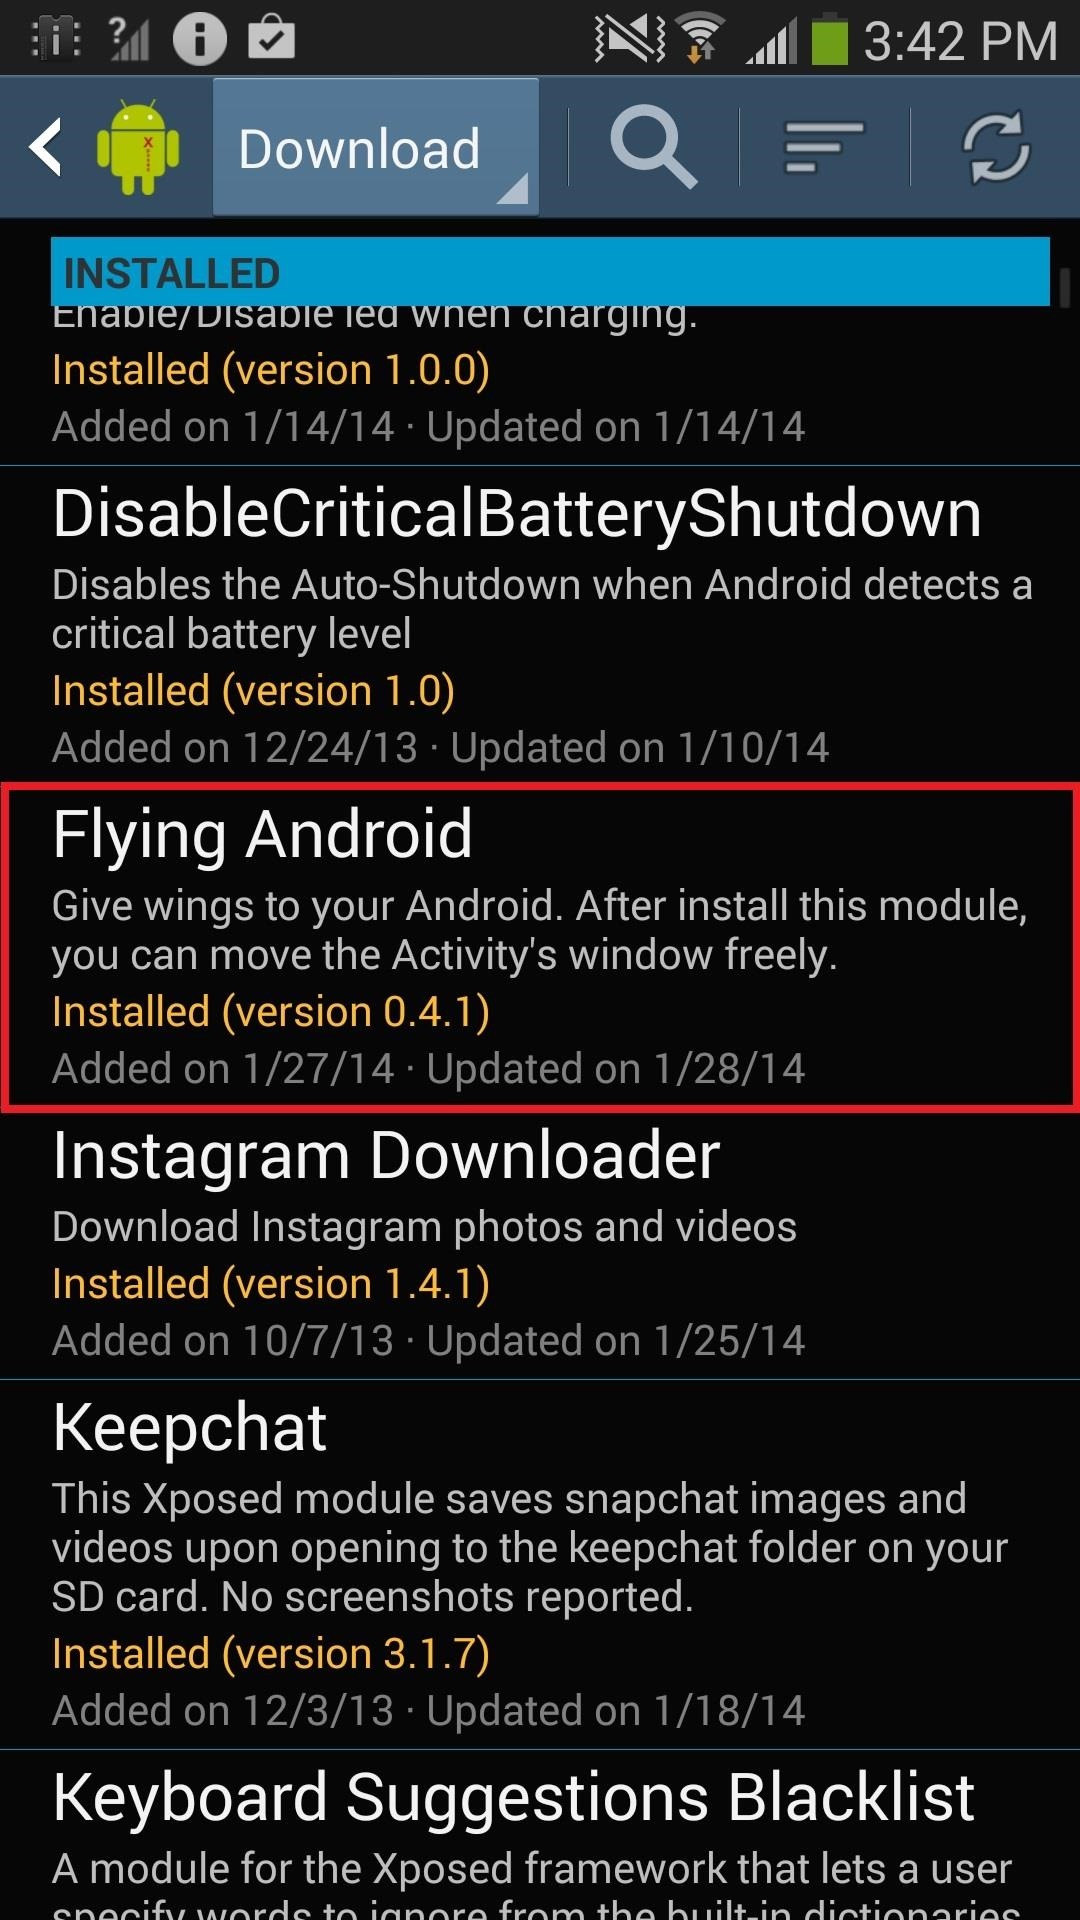 How to Move Any App's Window Around on Your Galaxy Note 3 for Better One-Handed Operation